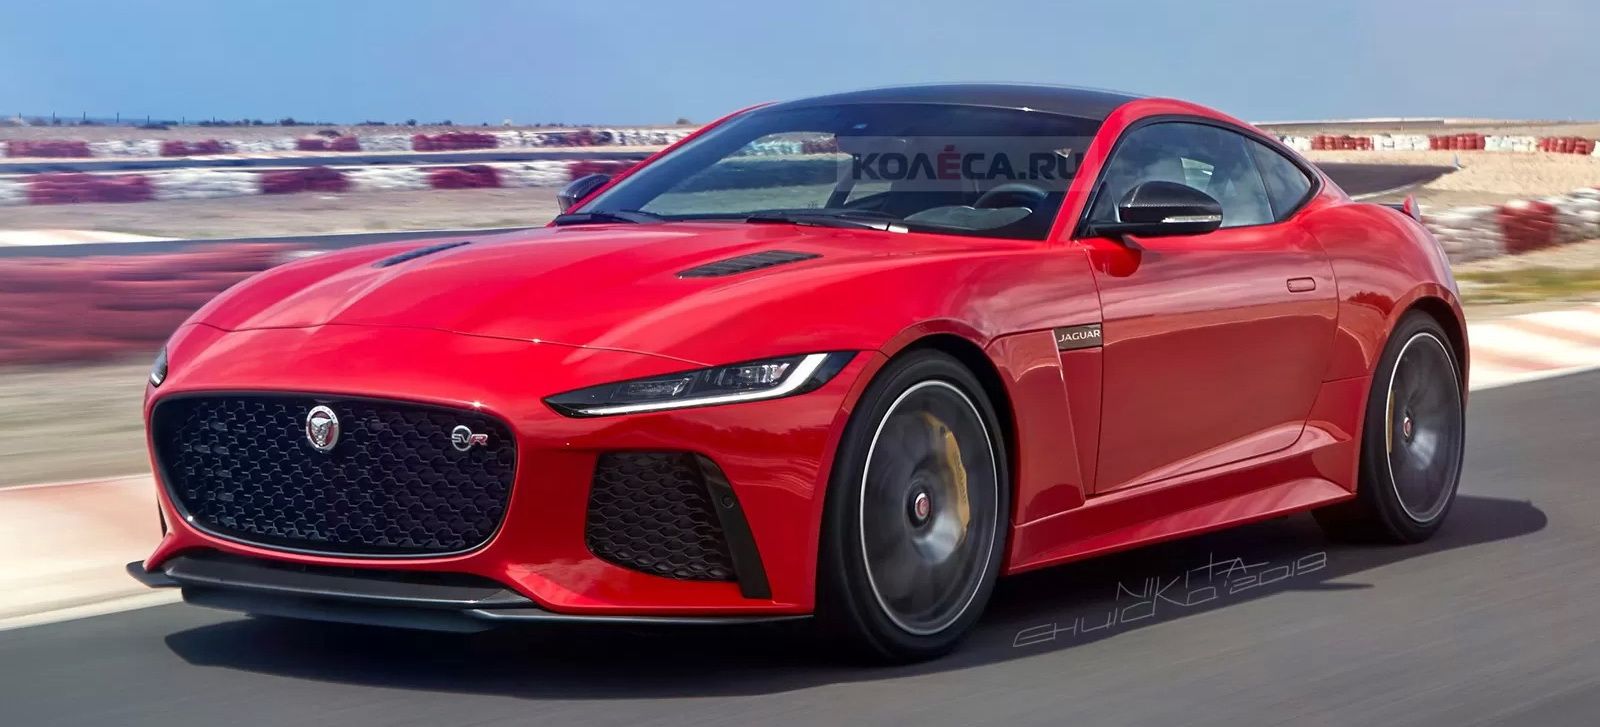 Jaguar F Type Could Look Like A Baby Aston Martin